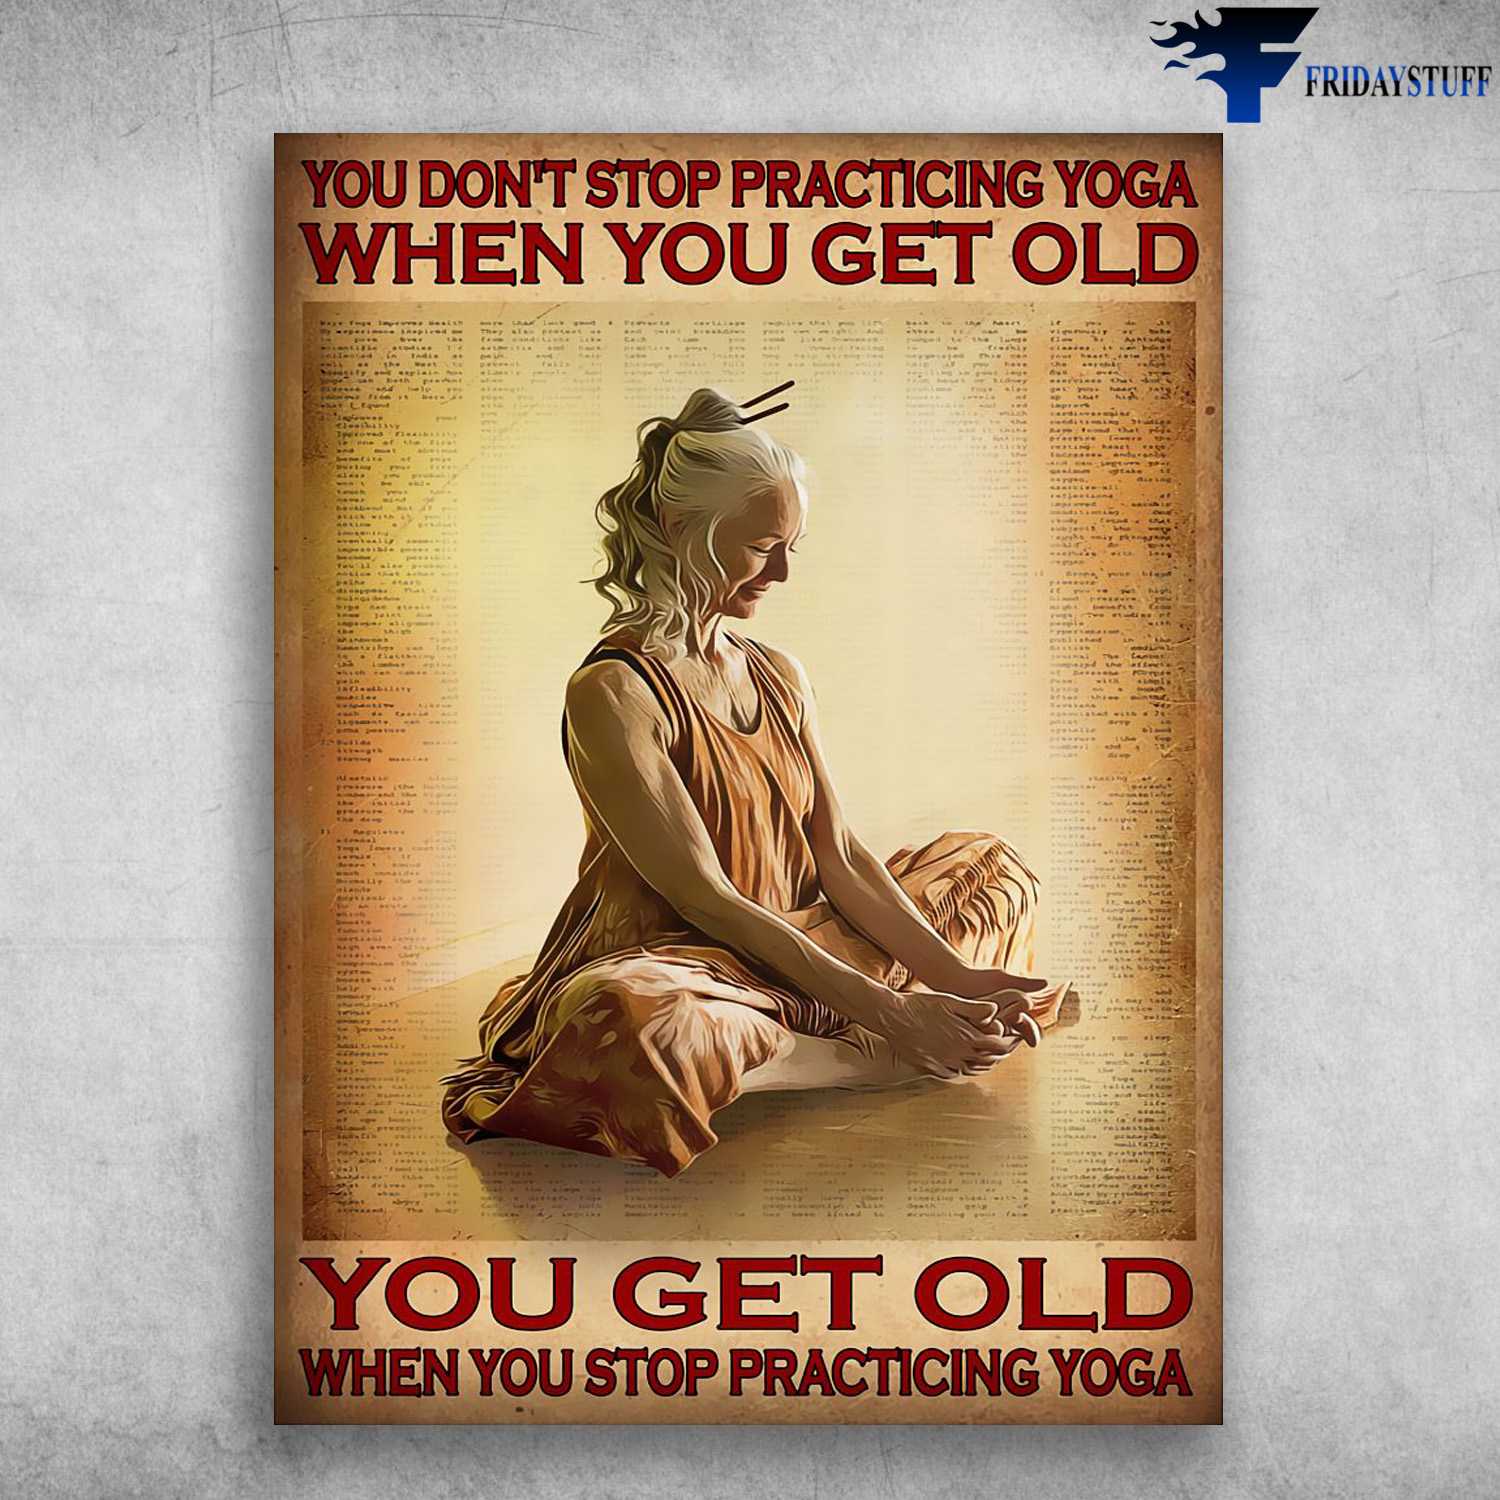 Old Lady Yoga, Yoga Poster, You Don't Stop Practicing Yoga When You Get Old, You Get Old When You Stop Practicing Yoga